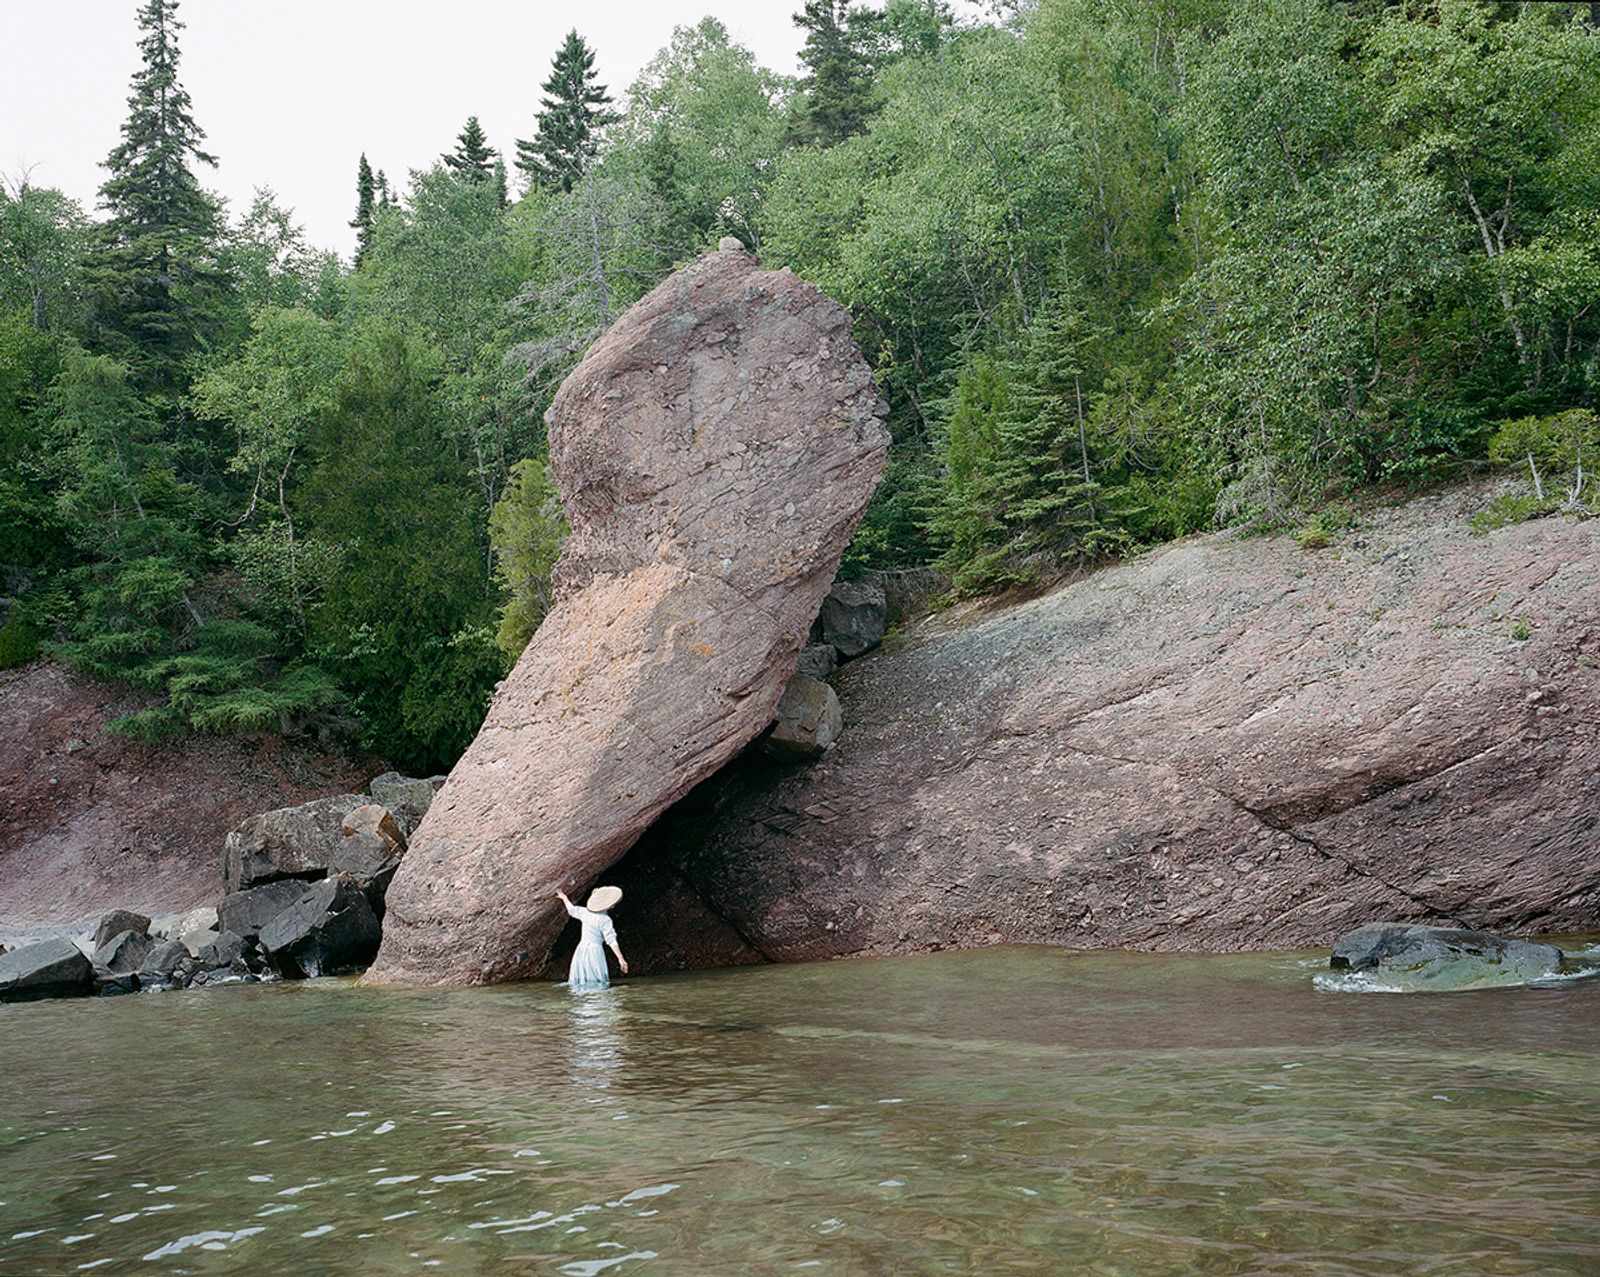 © Naomi Harris - Image from the I, Voyageur...In Search of Frances Anne Hopkins photography project